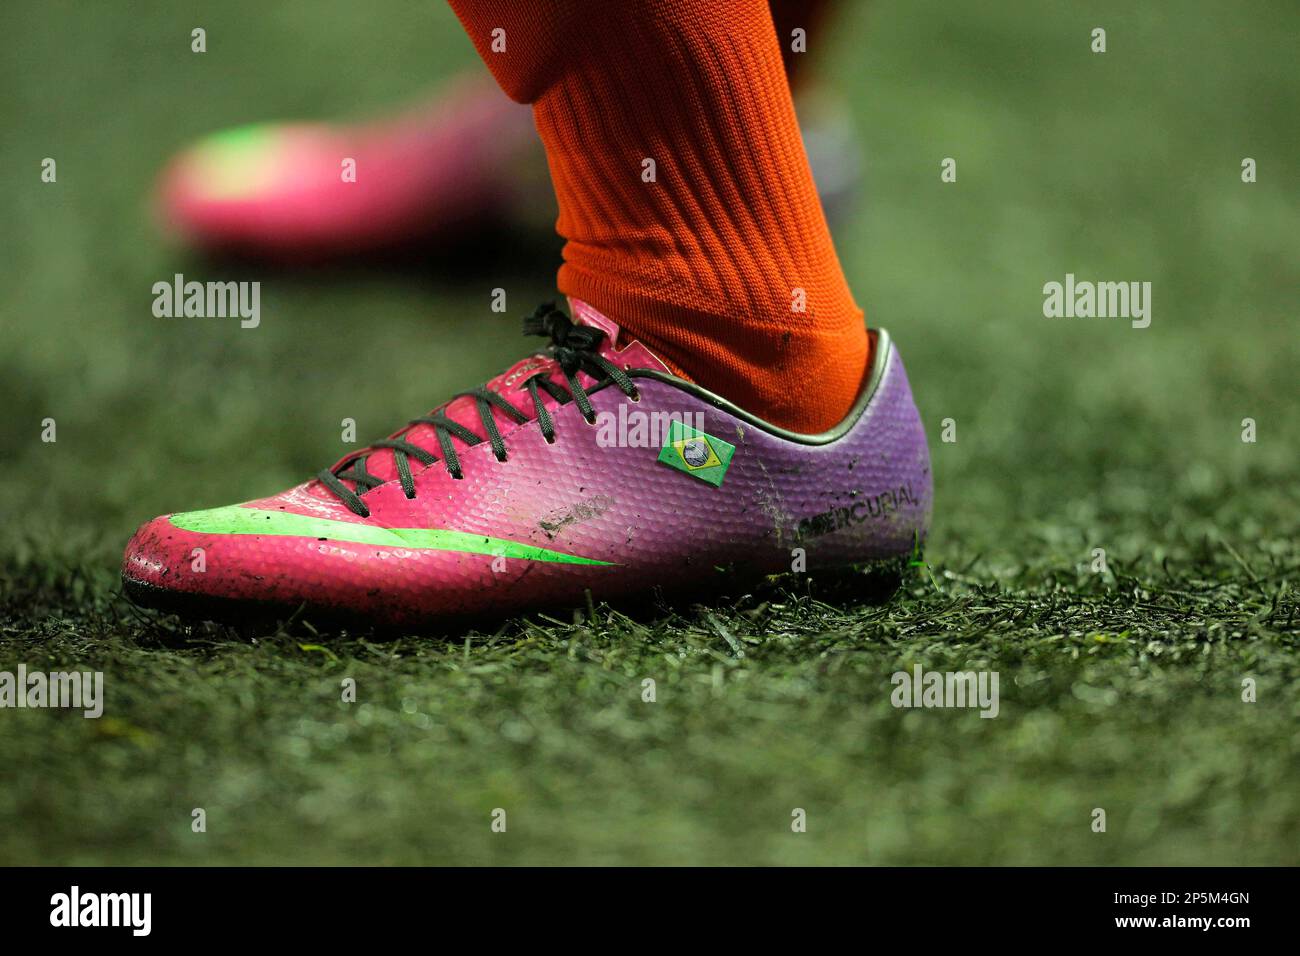 Feb. 11, 2013 - Liverpool, United Kingdom - The boots of Liverpool's new  signing Philippe Coutinho featuring the Brazilian flag - Barclays Premier  League - Liverpool vs West Bromwich Albion - Anfield -